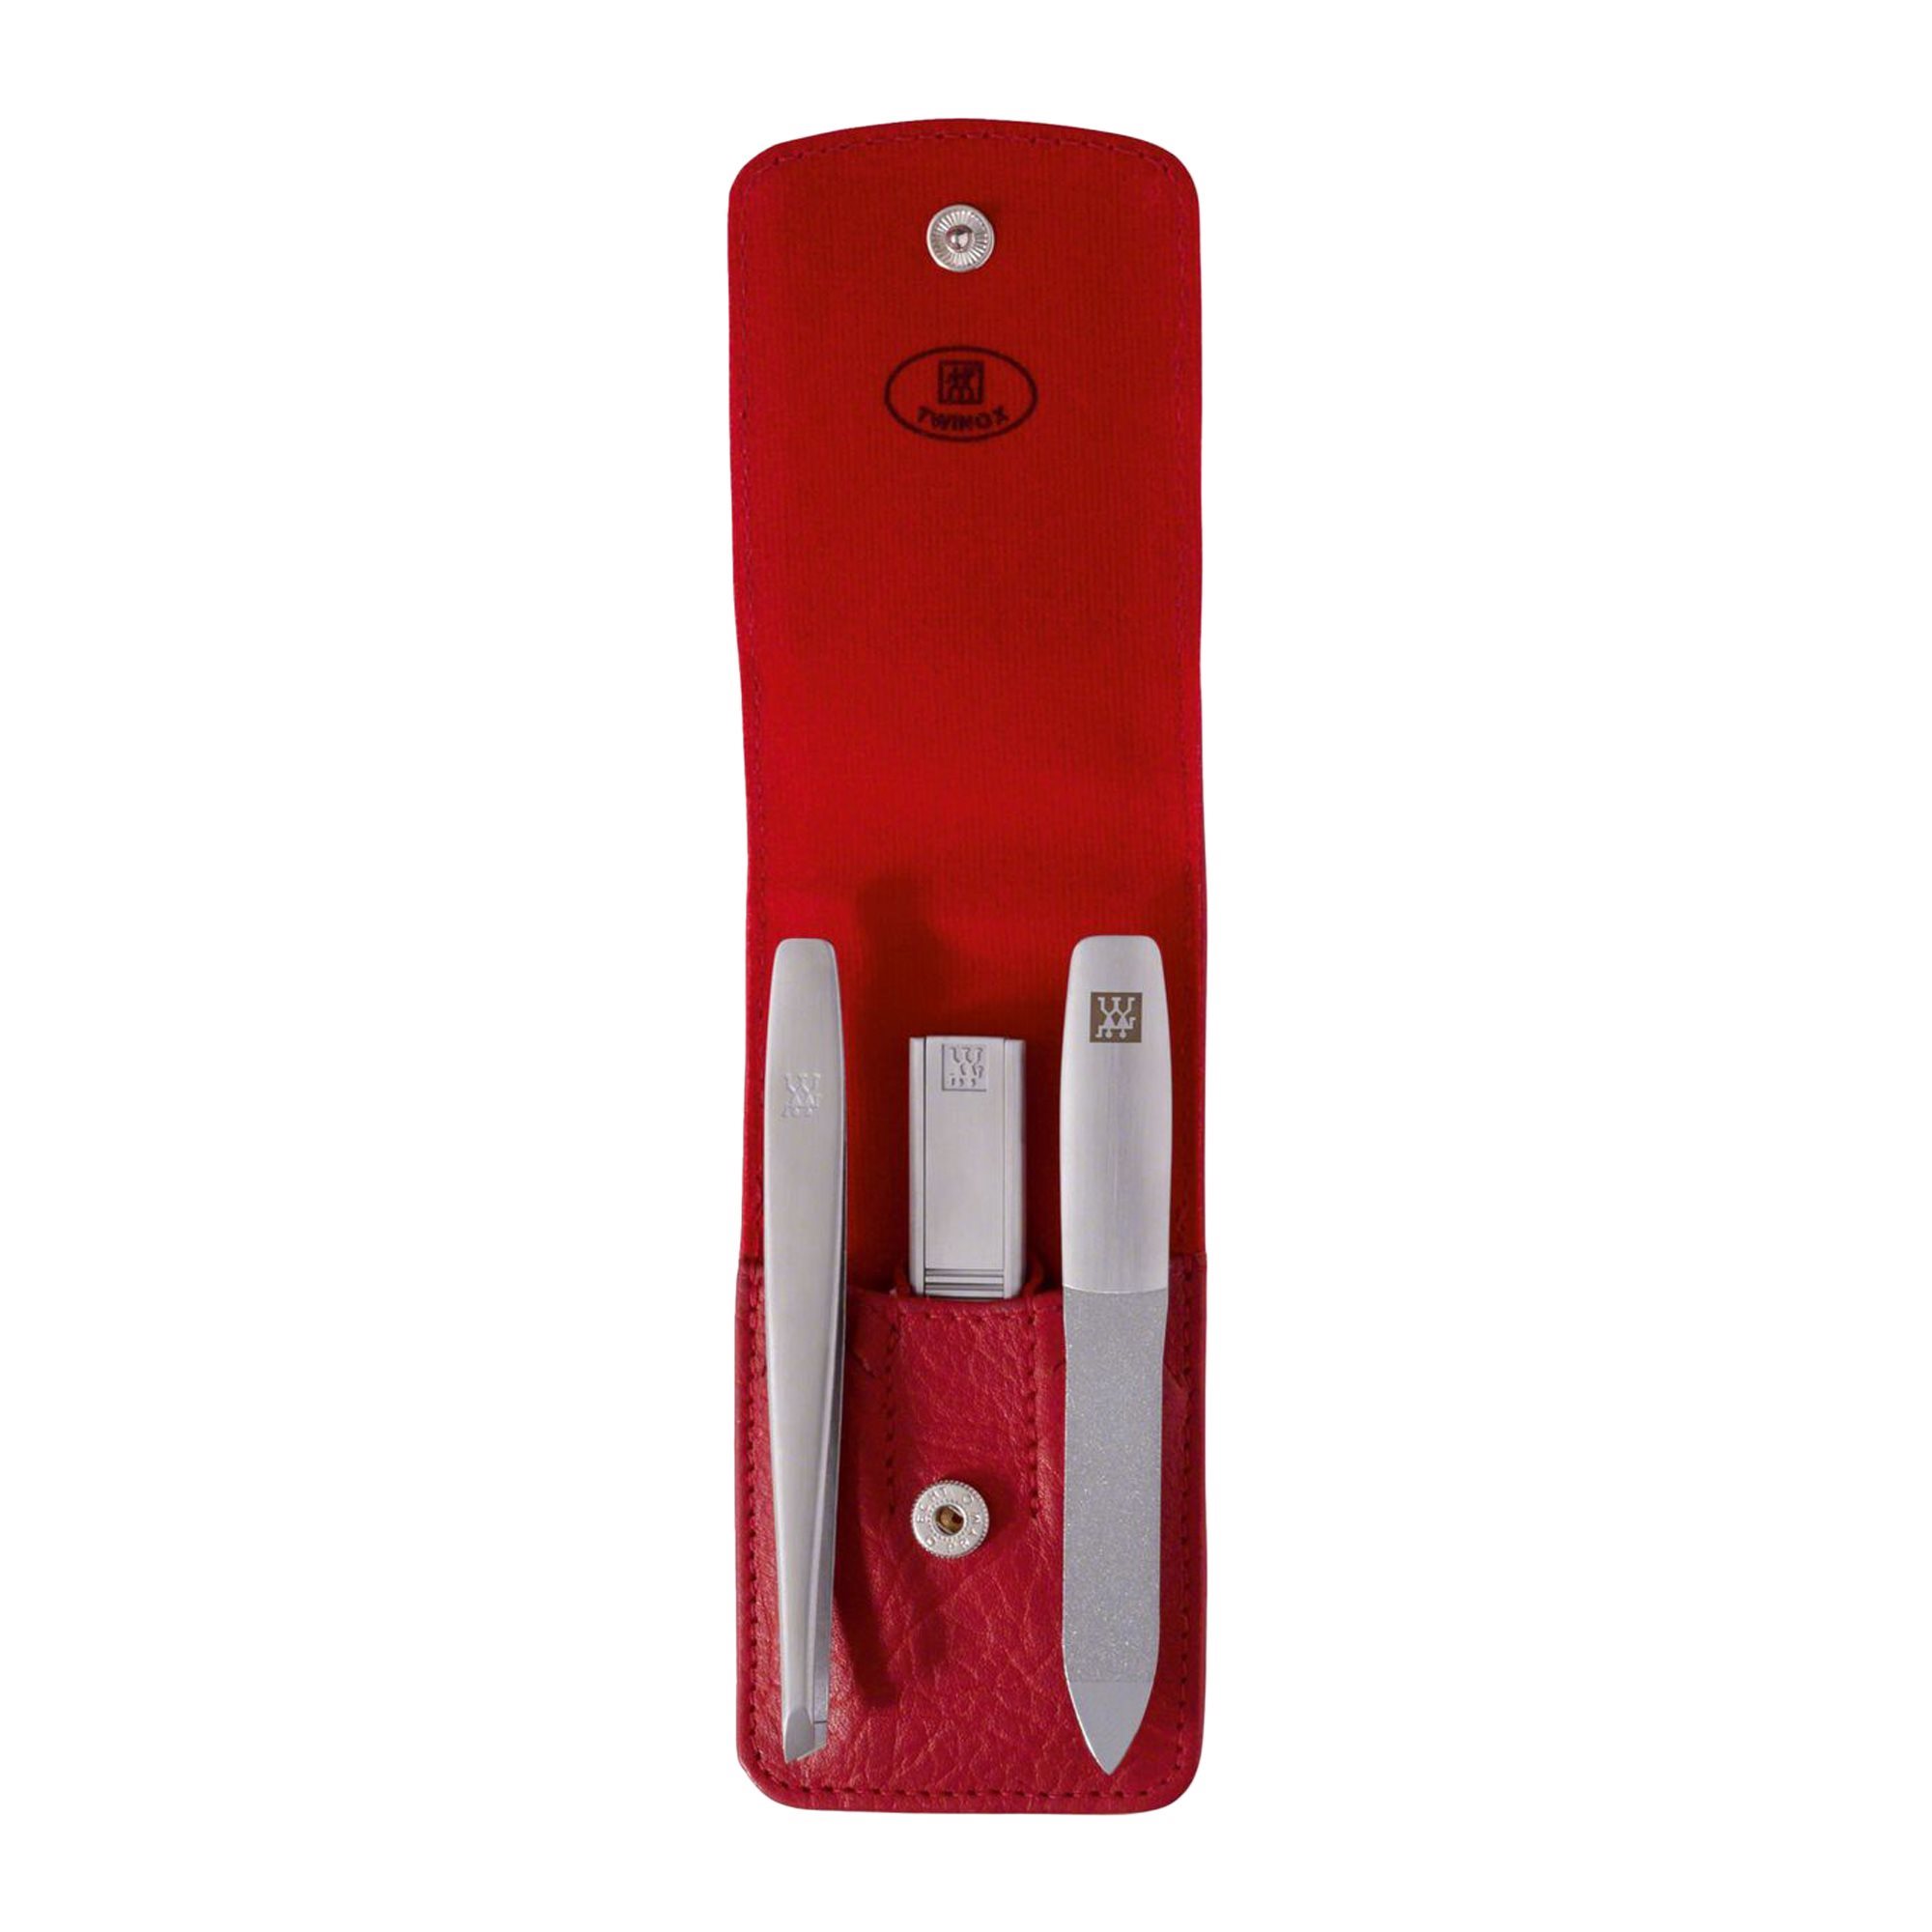 case, TWINOX | red leather Zwilling stainless - steel, KitchenShop 3-piece set, manicure